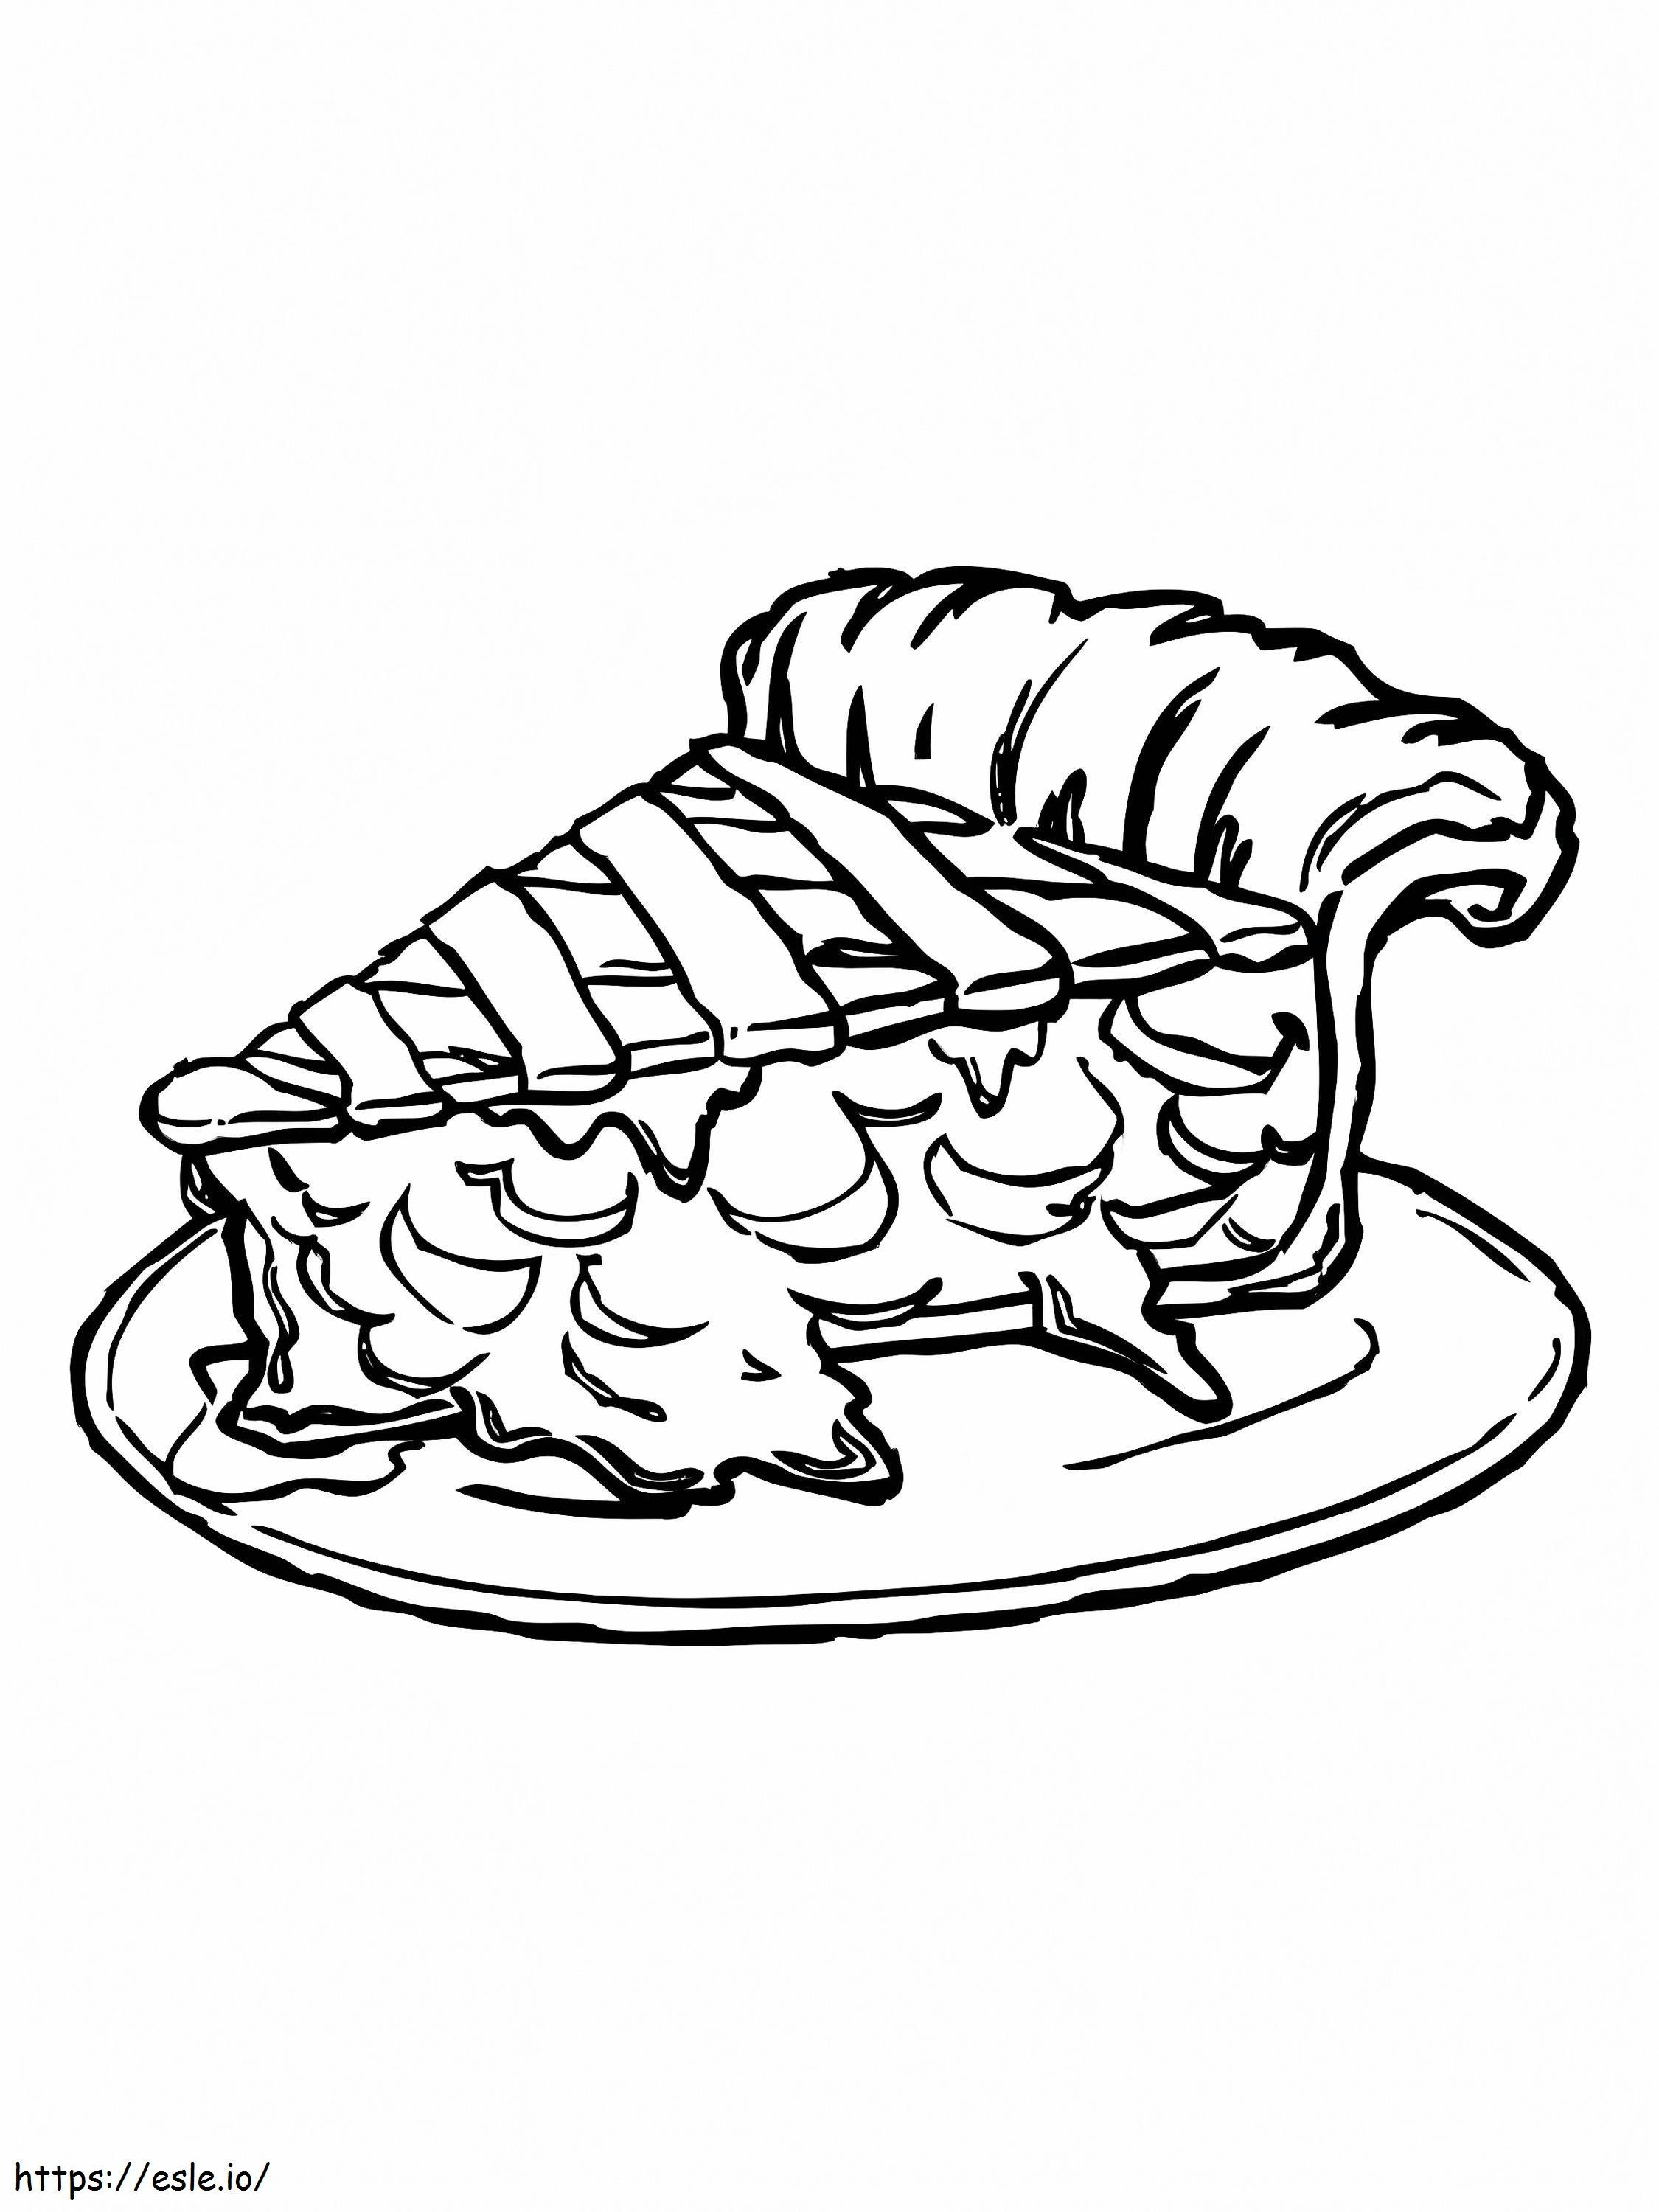 Piece Of Pie On Plate coloring page